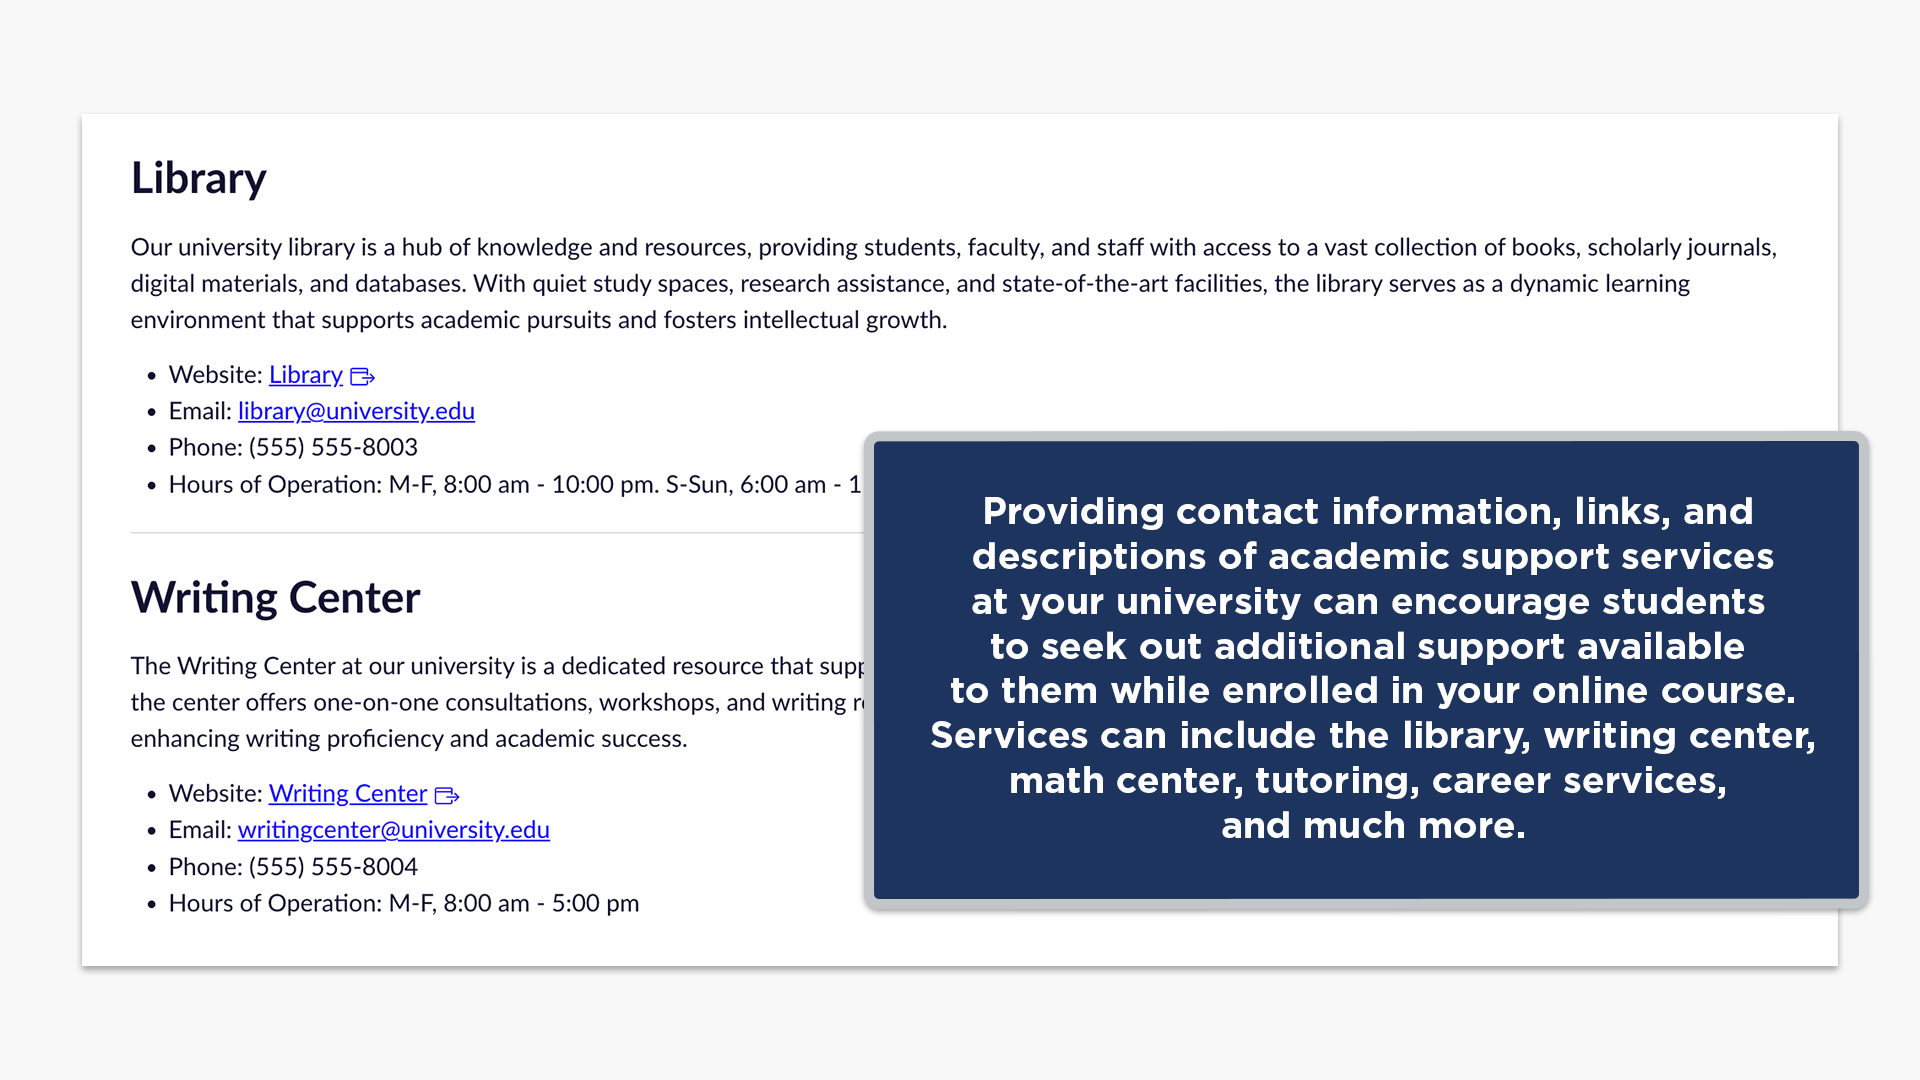 Providing contact information, links, and descriptions of academic support servicesat your university can encourage students to seek out additional support available to them while enrolled in your online course.Services can include the library, writing center,math center, tutoring, career services, and much more.